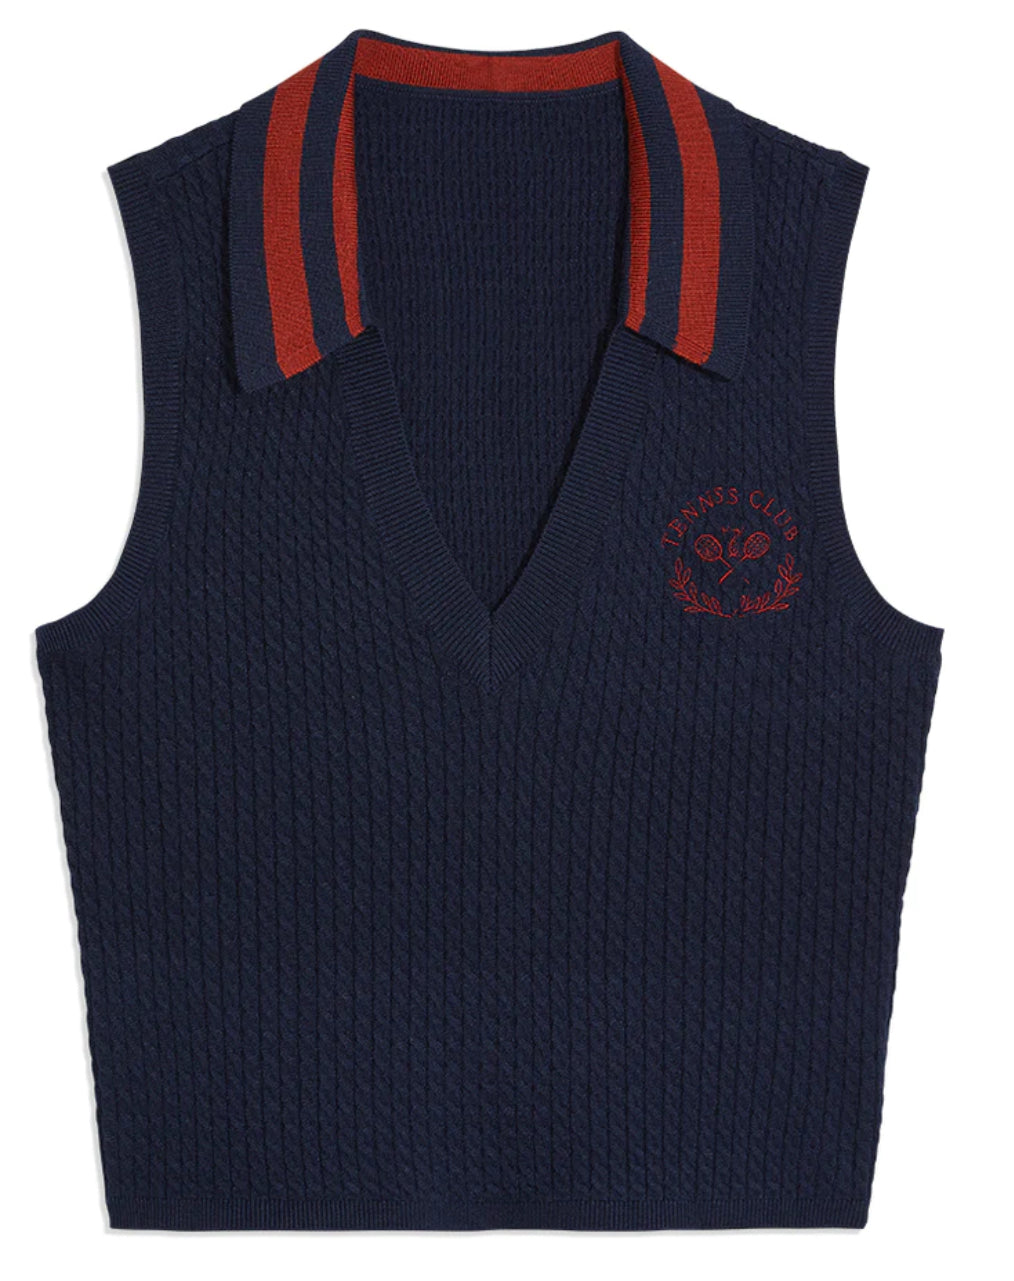 We Wore What-V- Neck Polo Tank